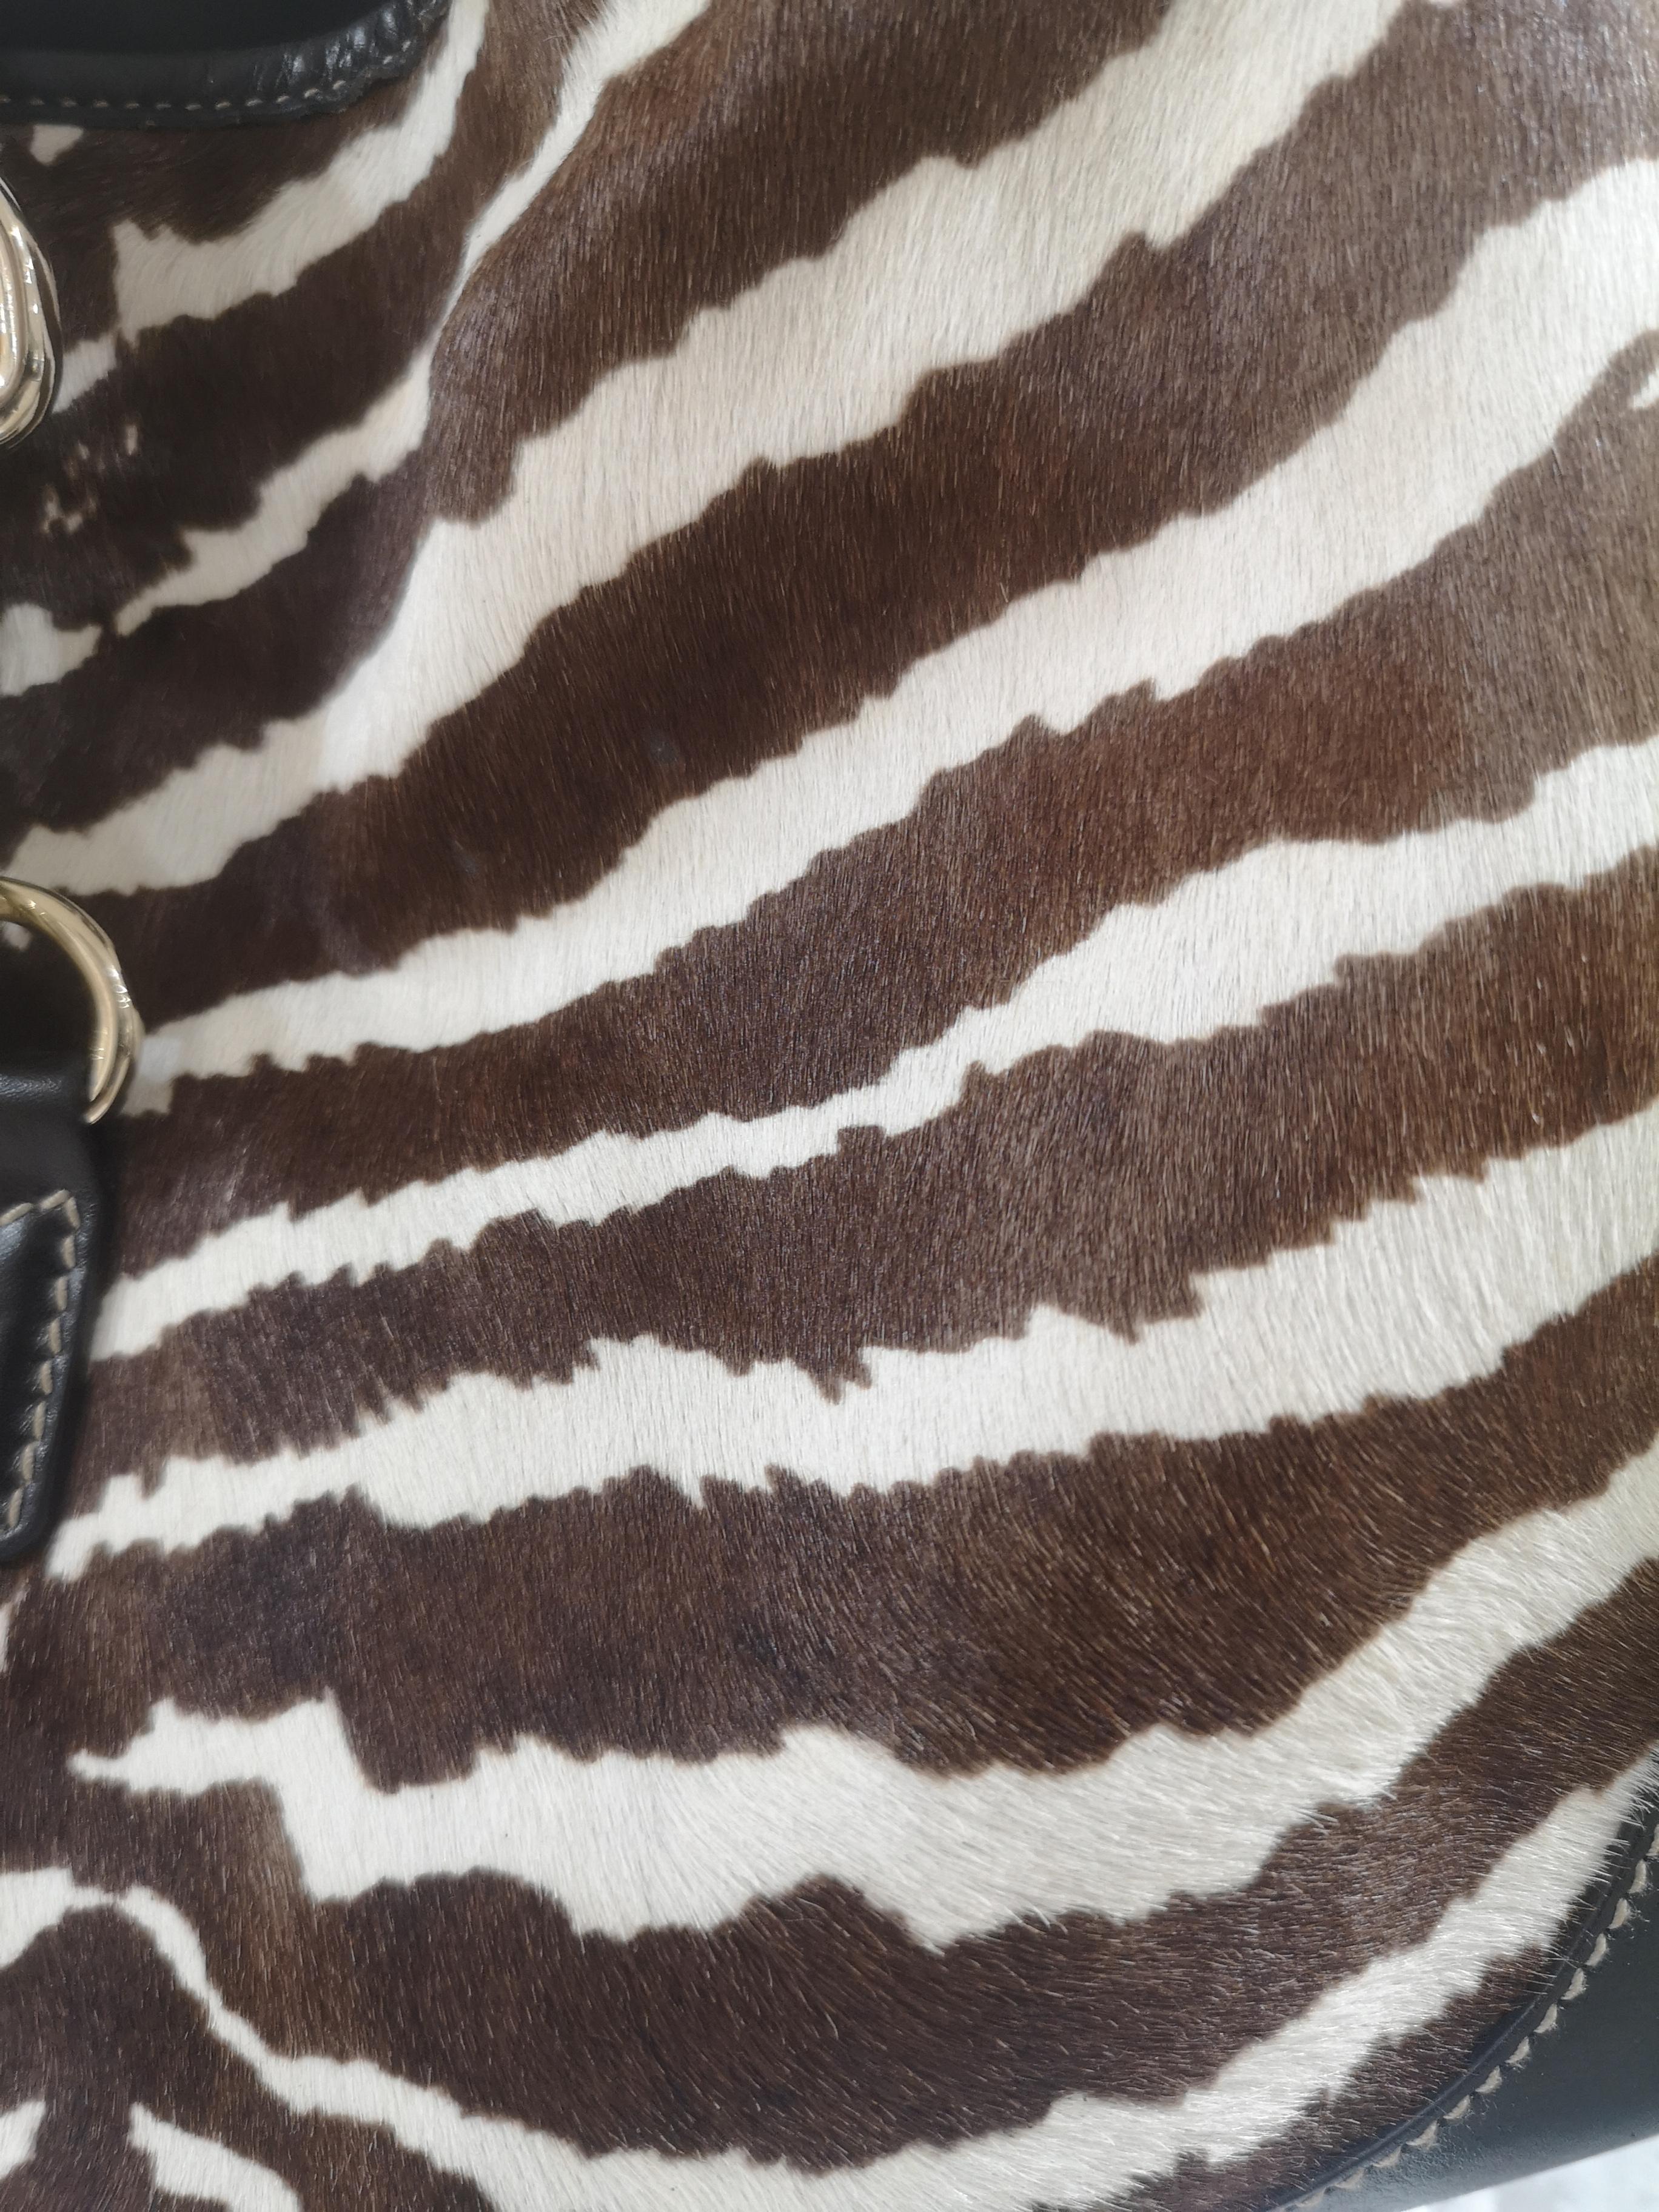 Gucci Jackie pony hair zebra shoulder bag
totally made in italy with zebra white and brown pony hair and dark brown leather
measurements: 26* 40 cm